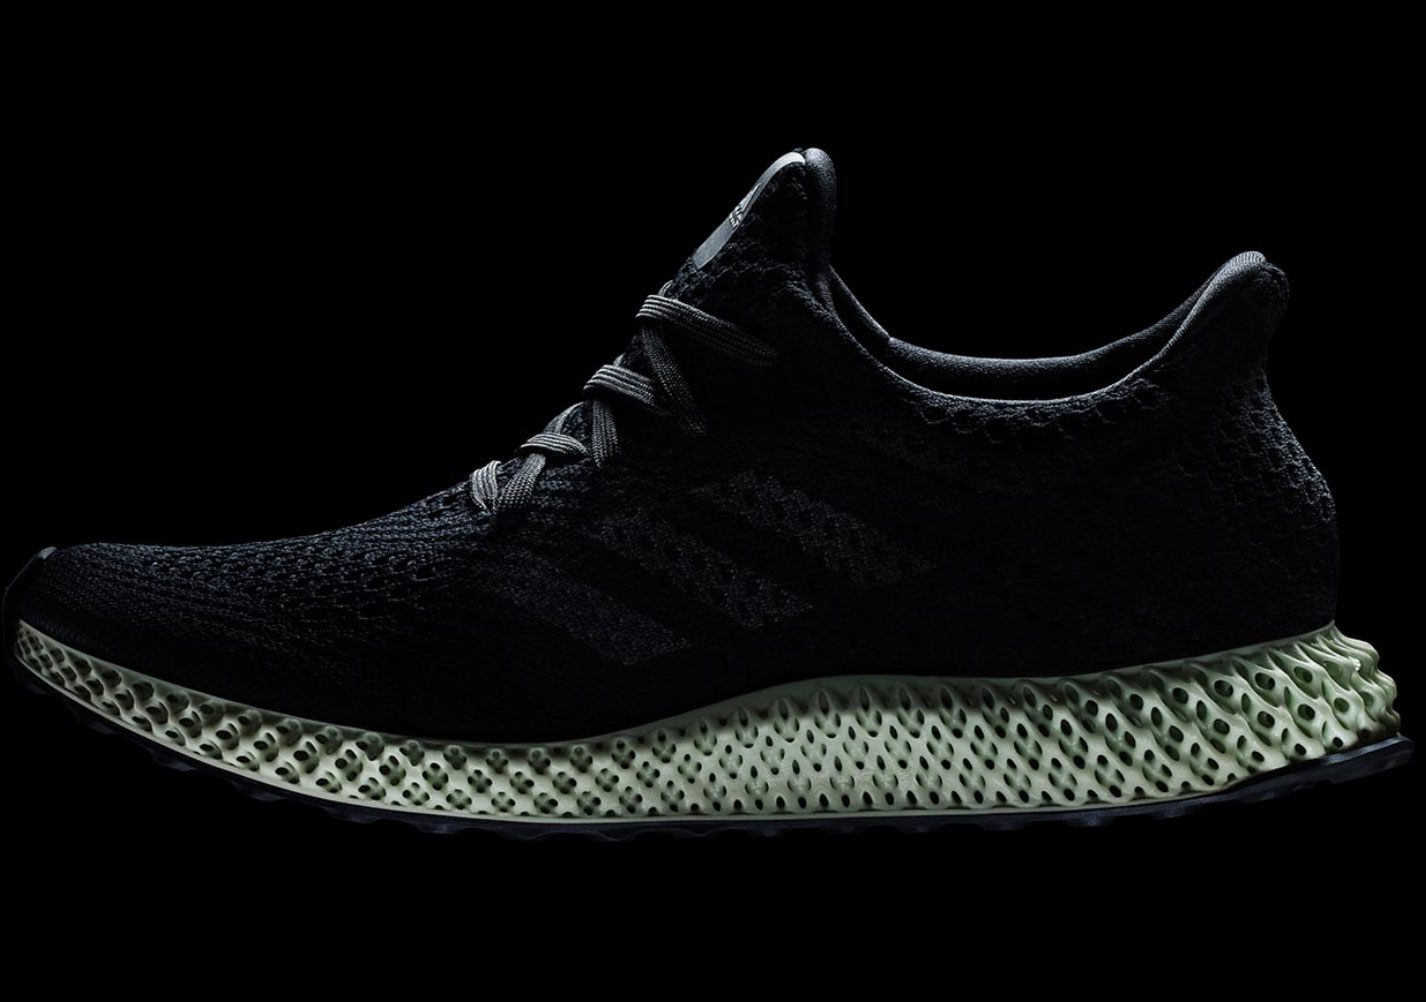 The adidas Futurecraft 4D In Ash Green Will Release On January 18th